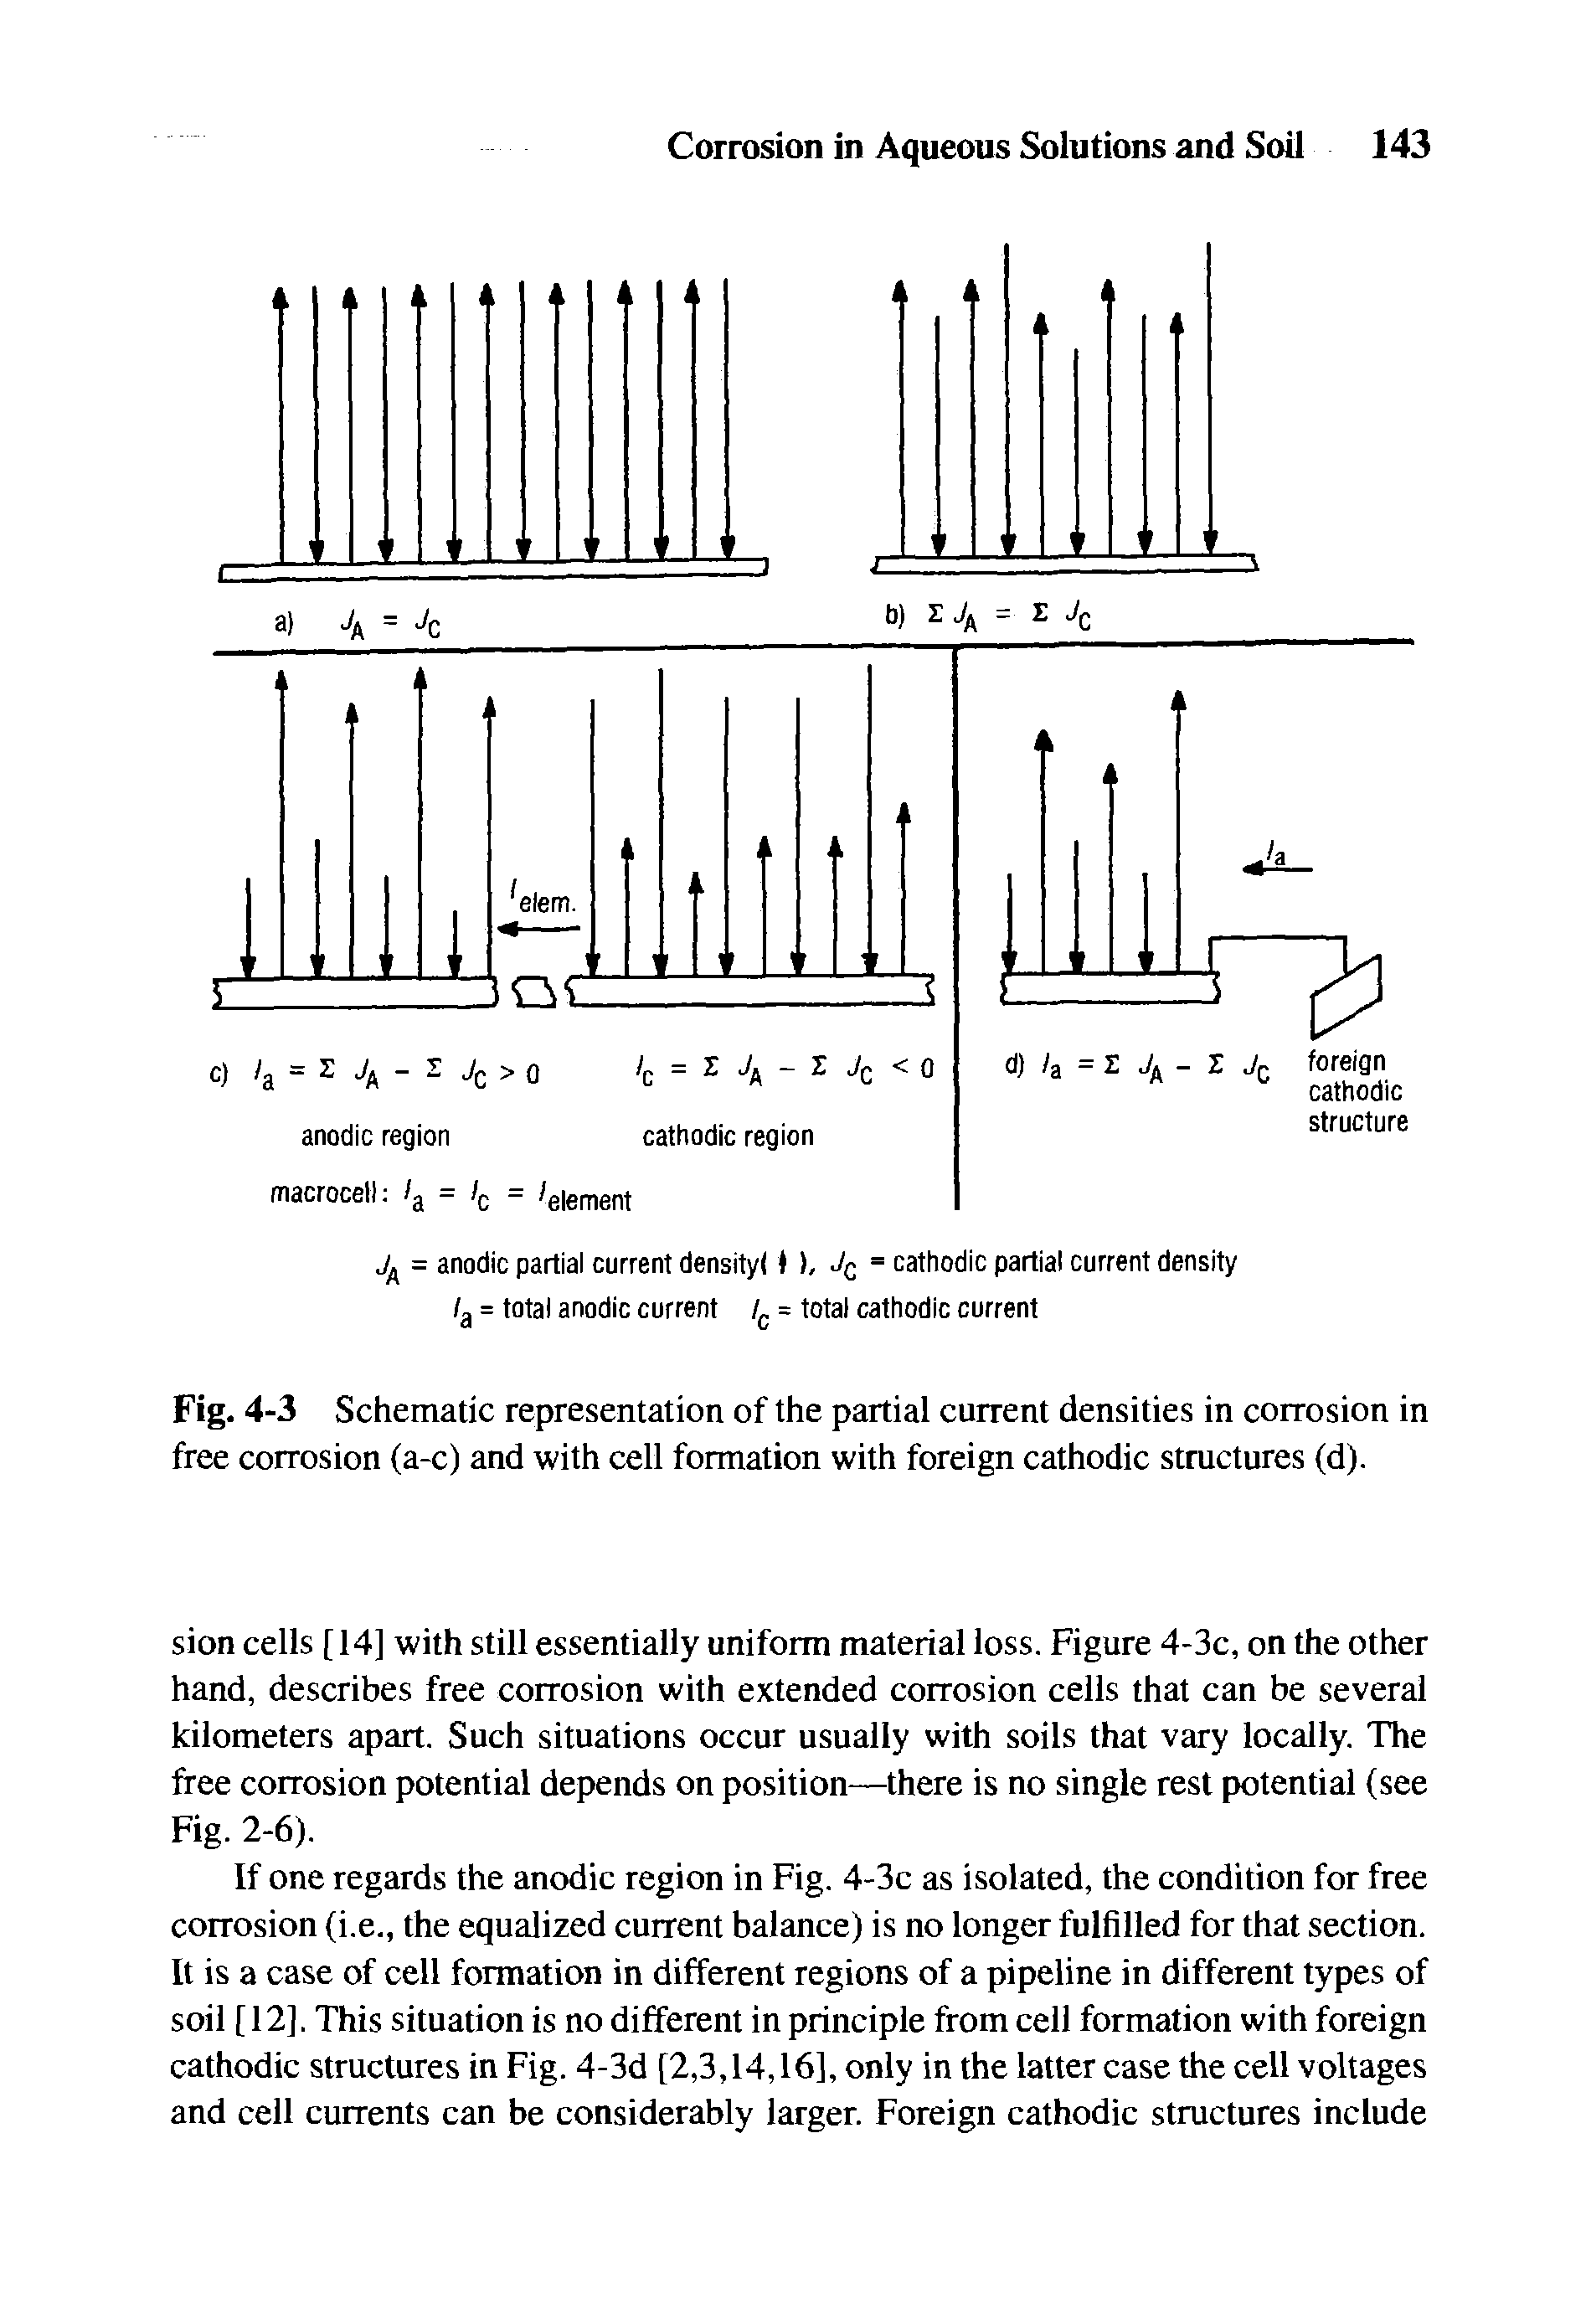 Fig. 4-3 Schematic representation of the partial current densities in corrosion in free corrosion (a-c) and with cell formation with foreign cathodic structures (d).